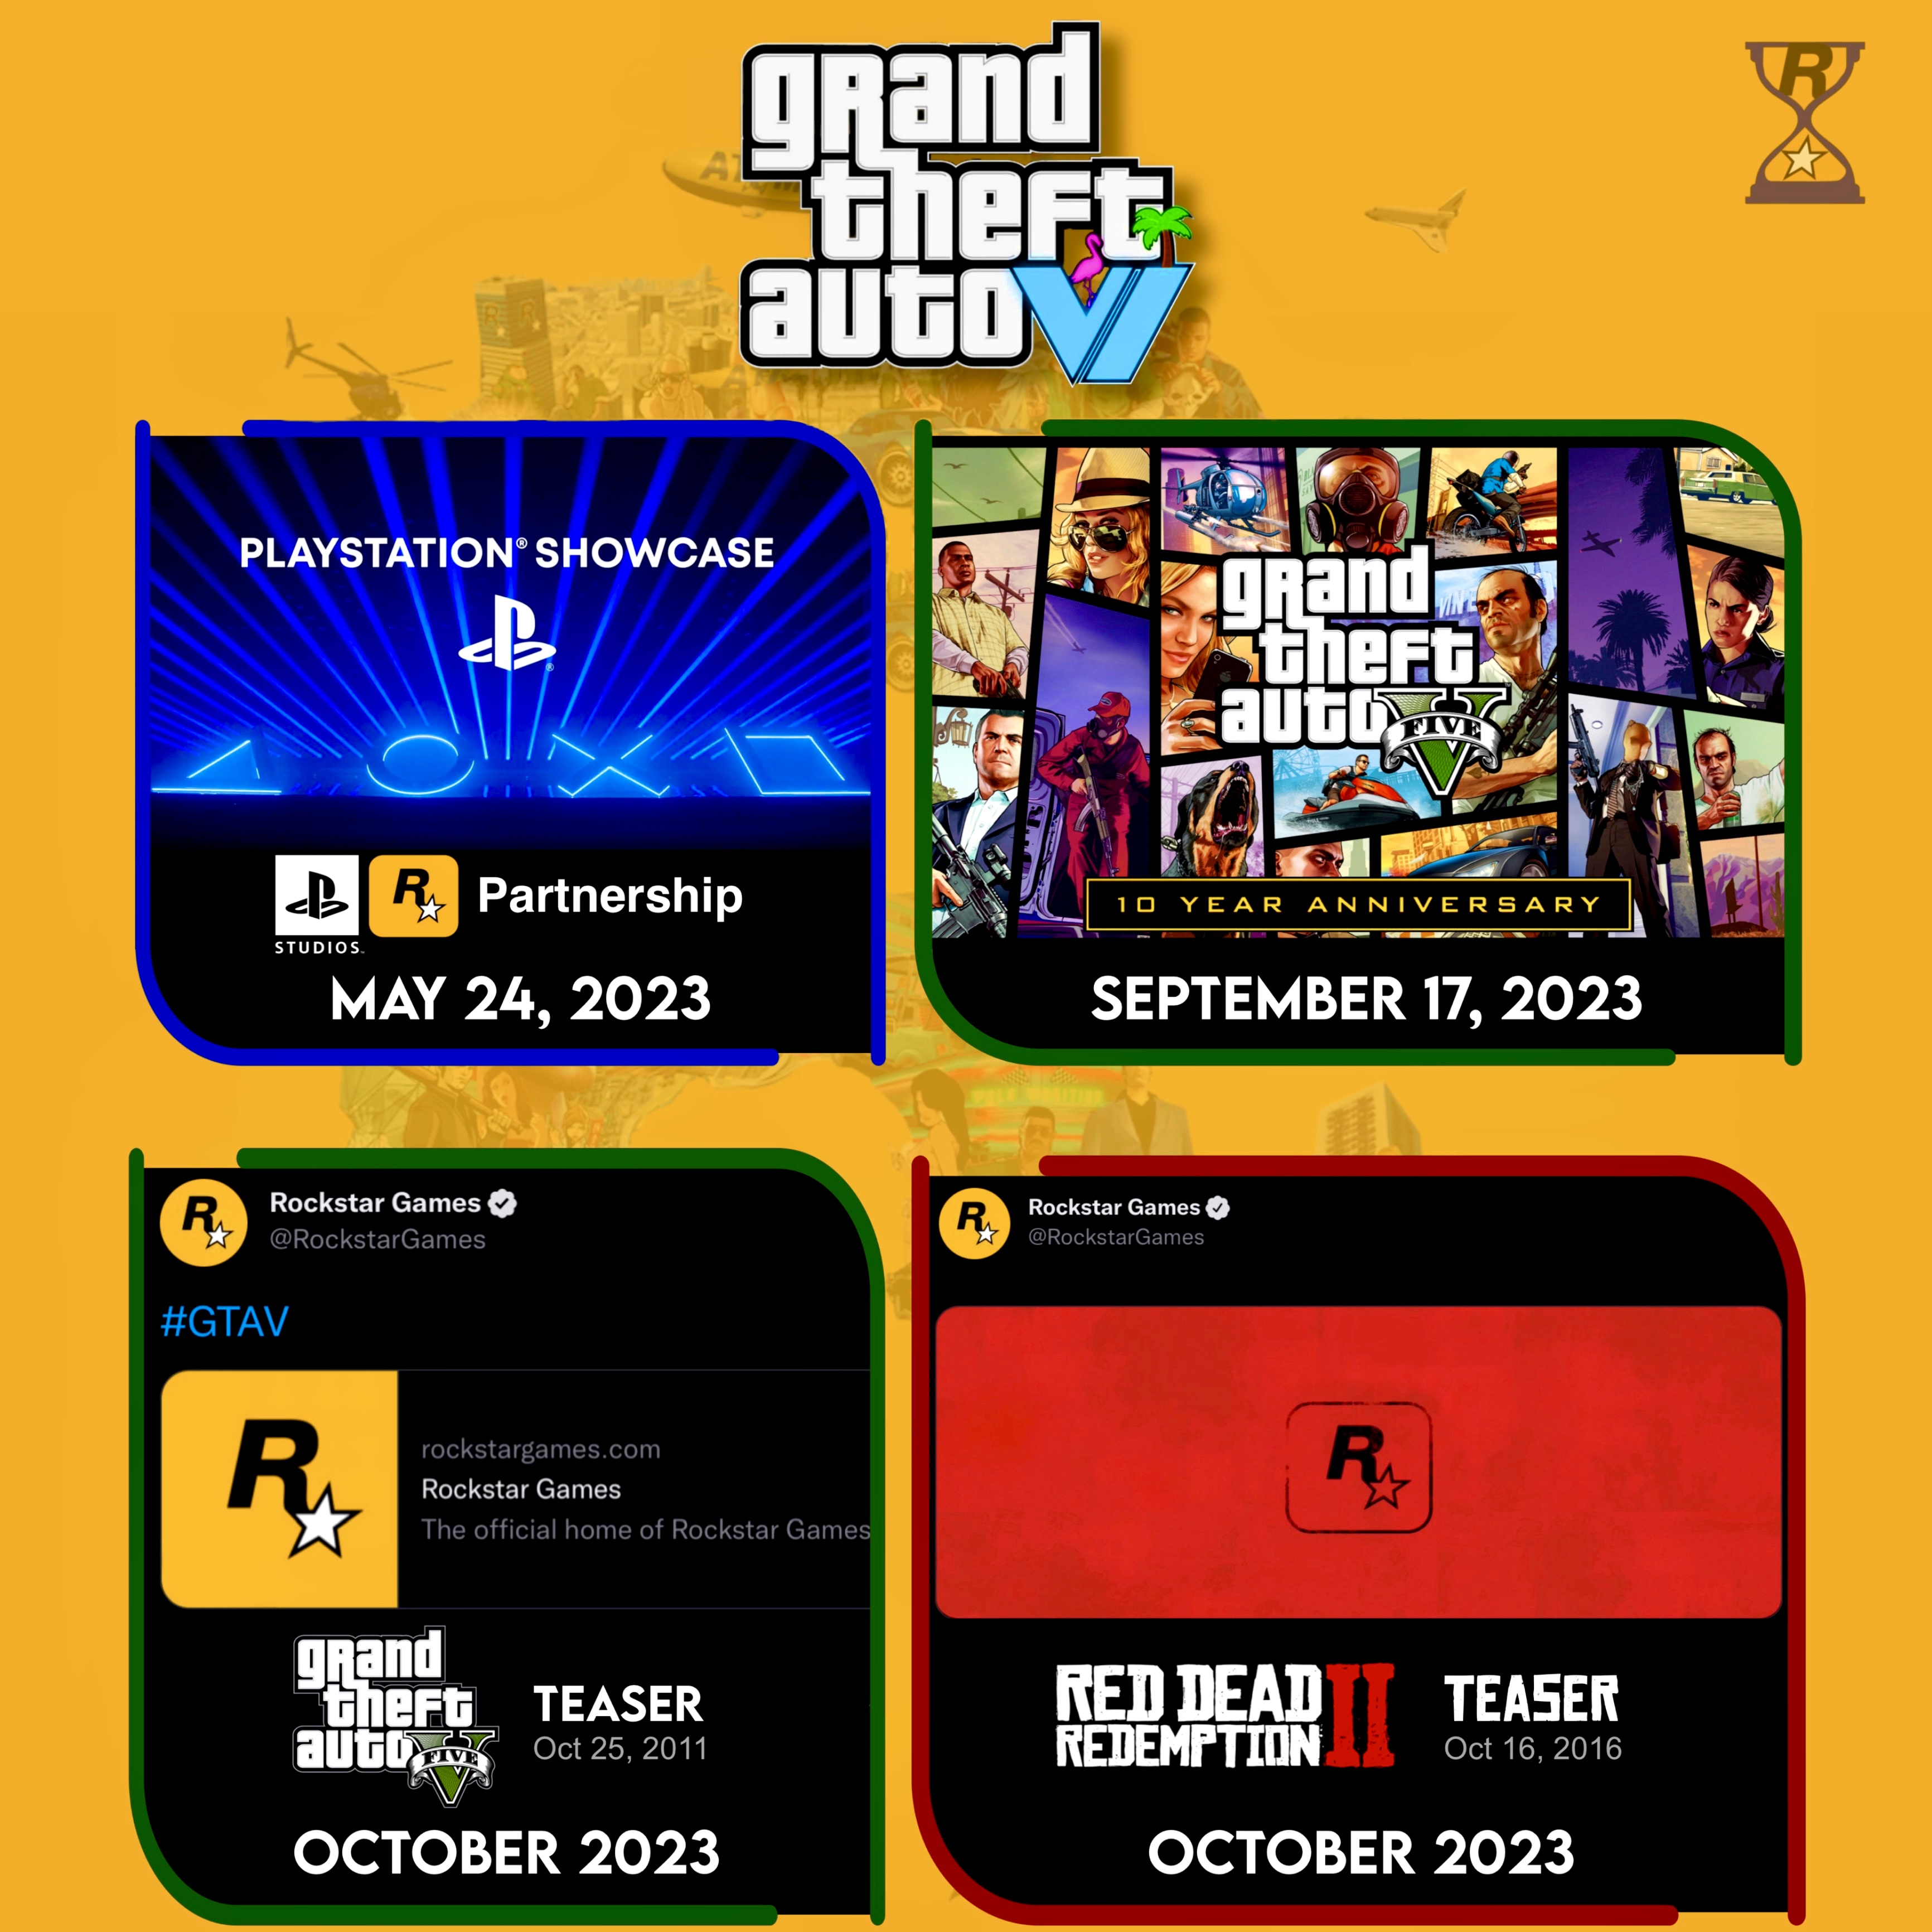 GTA 6 Trailer Countdown ⏳ on X: Rockstars Games is currently